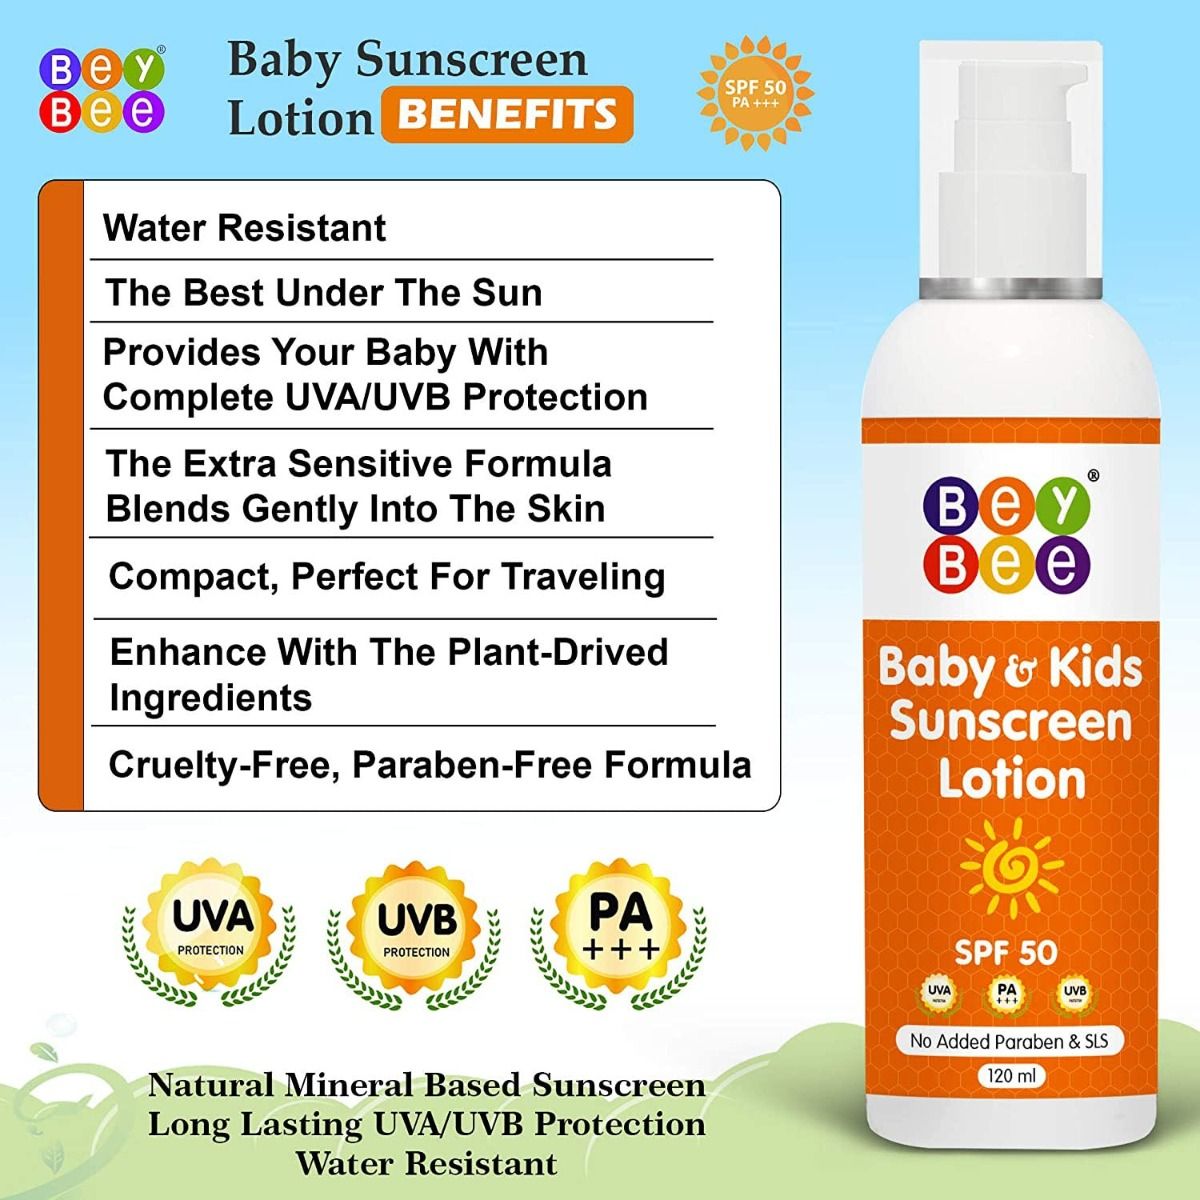 Bey Bee Baby & Kids Sunscreen Lotion SPF 50, 120 ml, Pack of 1 